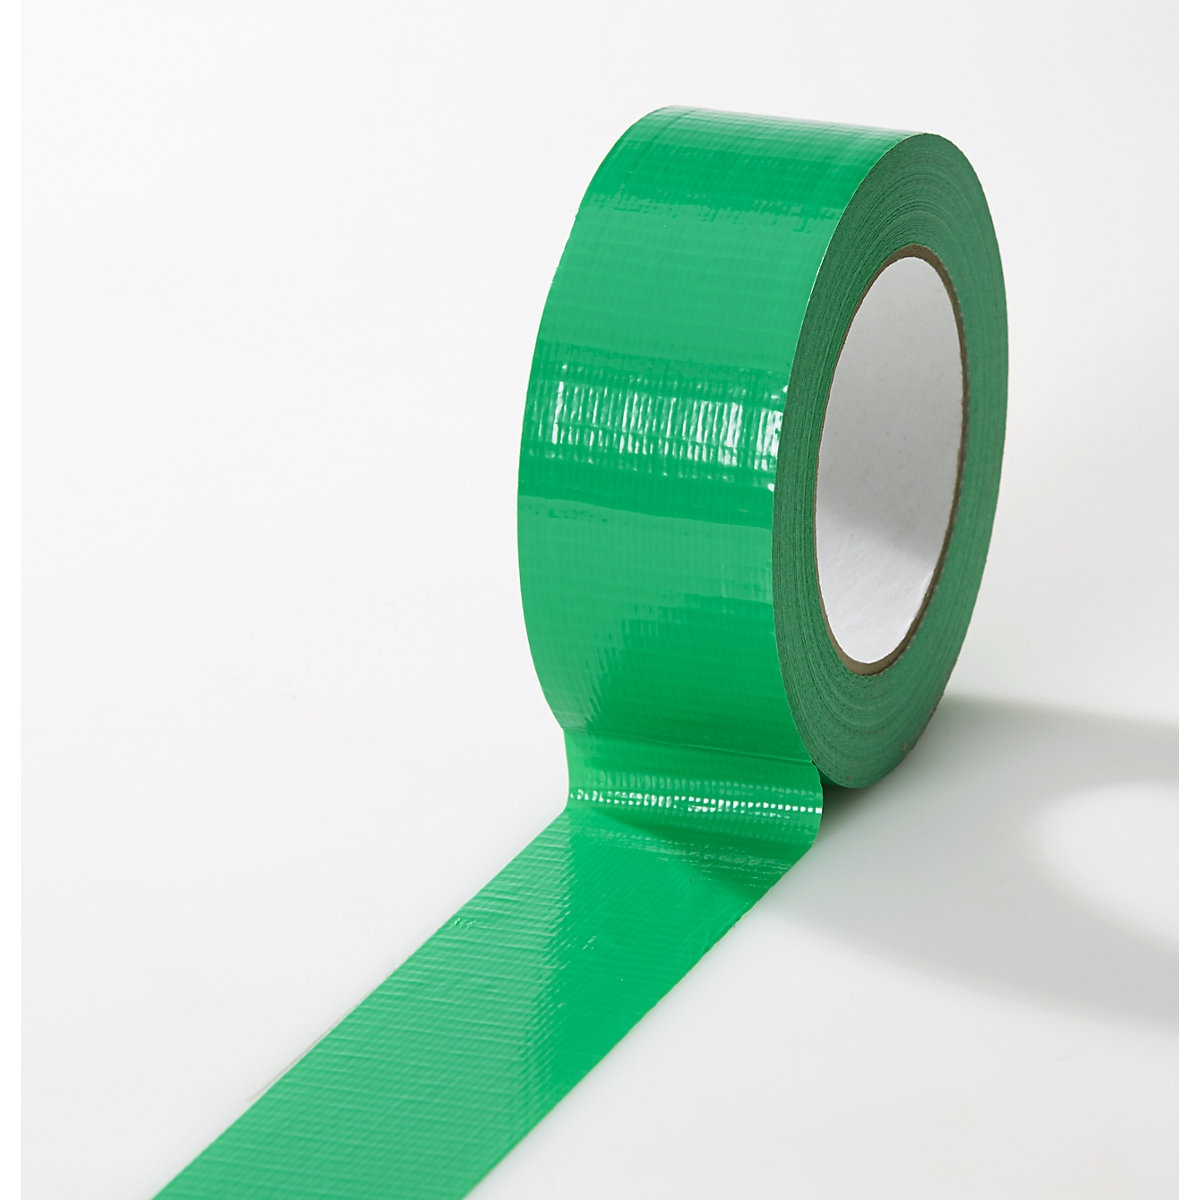 Fabric tape, in different colours, pack of 24 rolls, green, tape width 38 mm-21